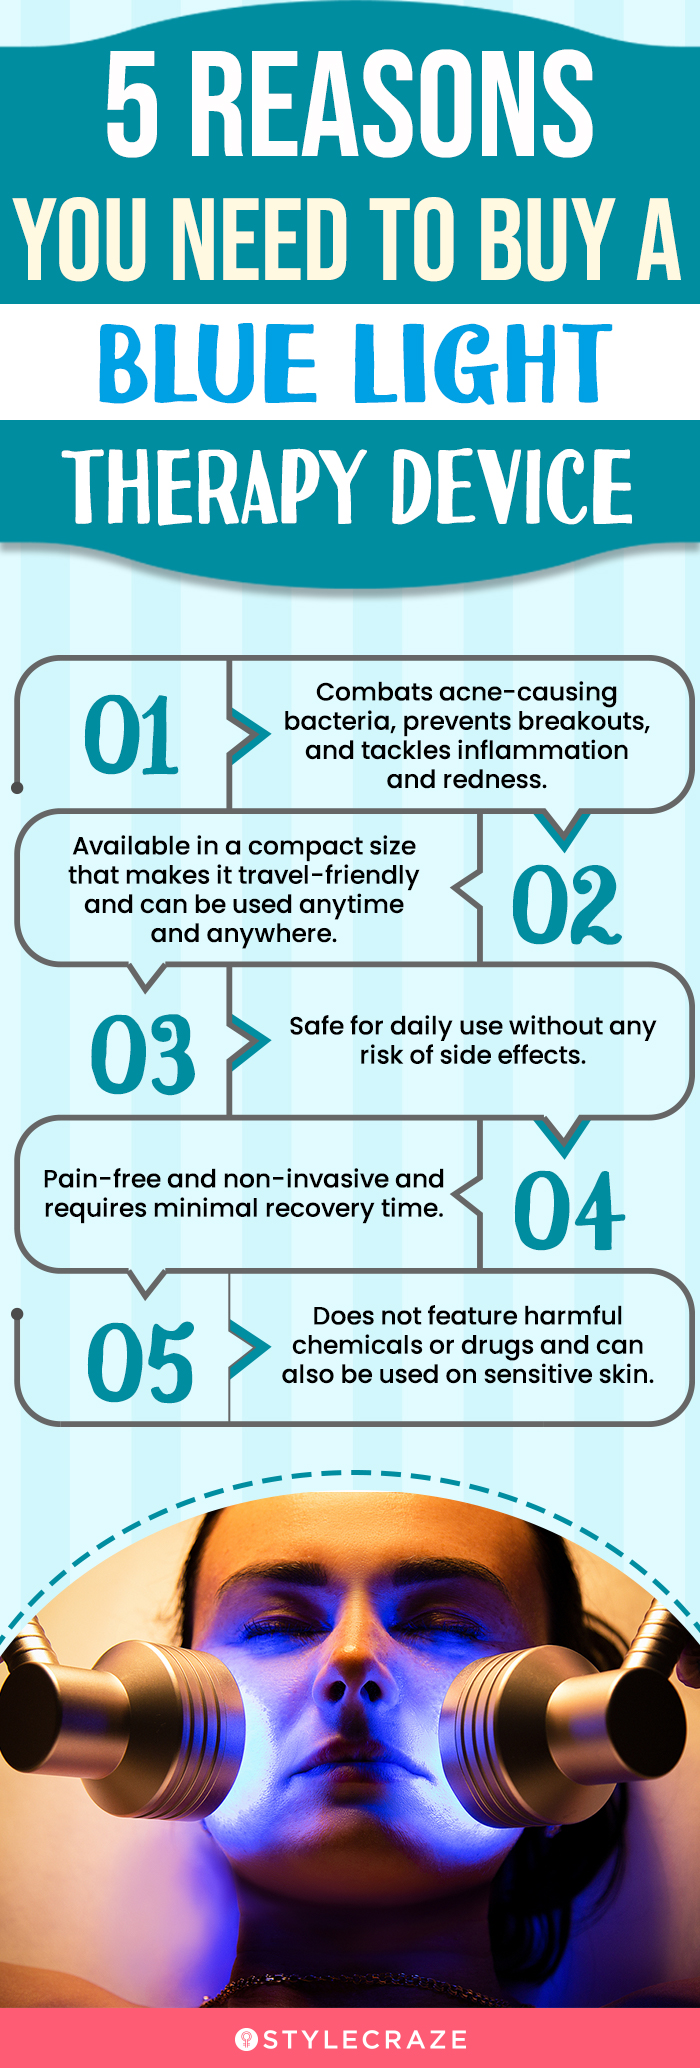 Reasons You Need To Buy A Blue Light Therapy Device (infographic)